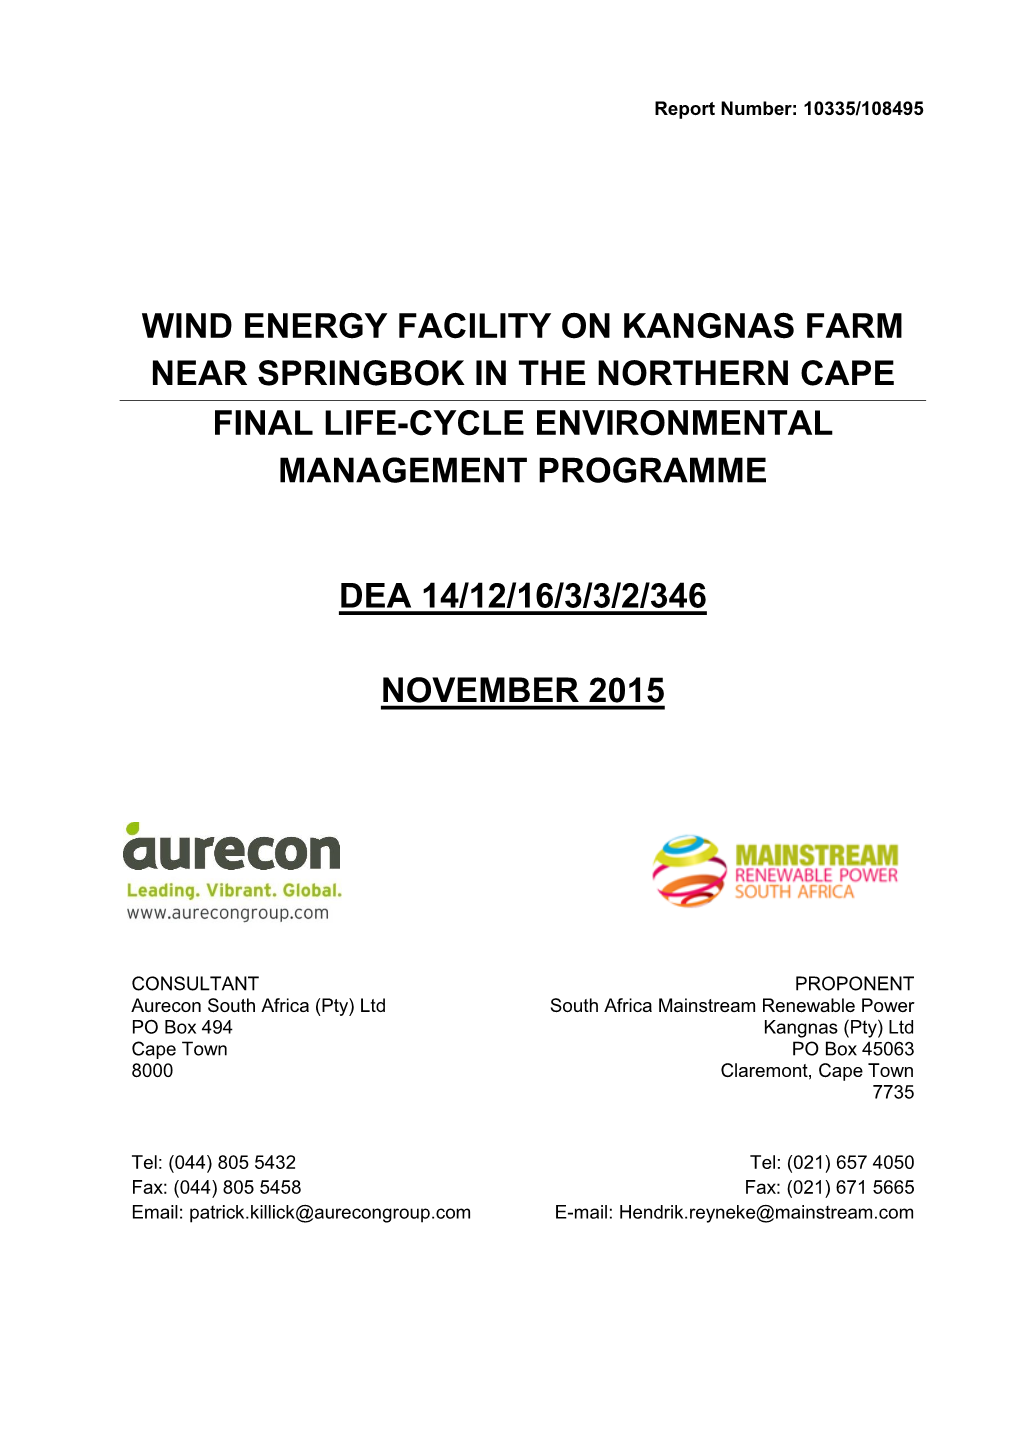 Wind Energy Facility on Kangnas Farm Near Springbok in the Northern Cape Final Life-Cycle Environmental Management Programme